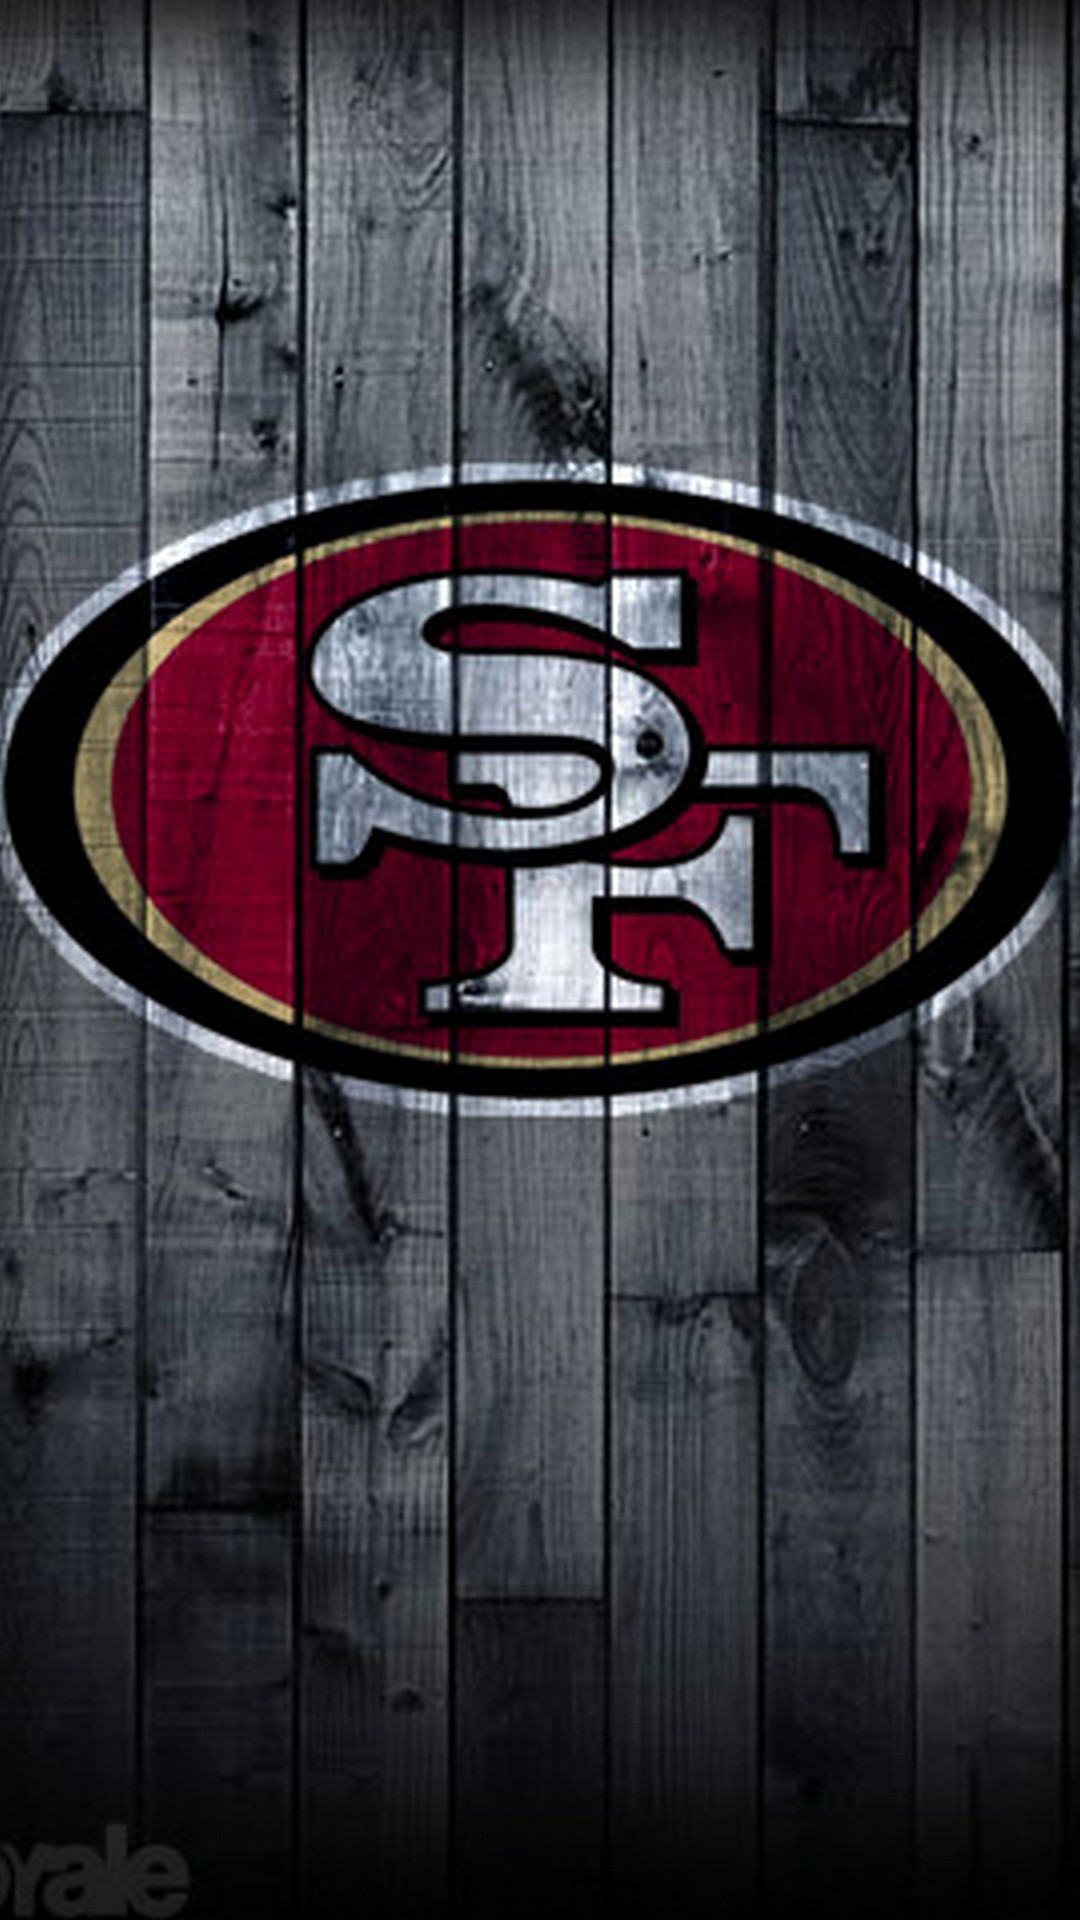 San Francisco 49ers iPhone Home Screen Wallpaper with high-resolution 1080x1920 pixel. Download and set as wallpaper for Desktop Computer, Apple iPhone X, XS Max, XR, 8, 7, 6, SE, iPad, Android